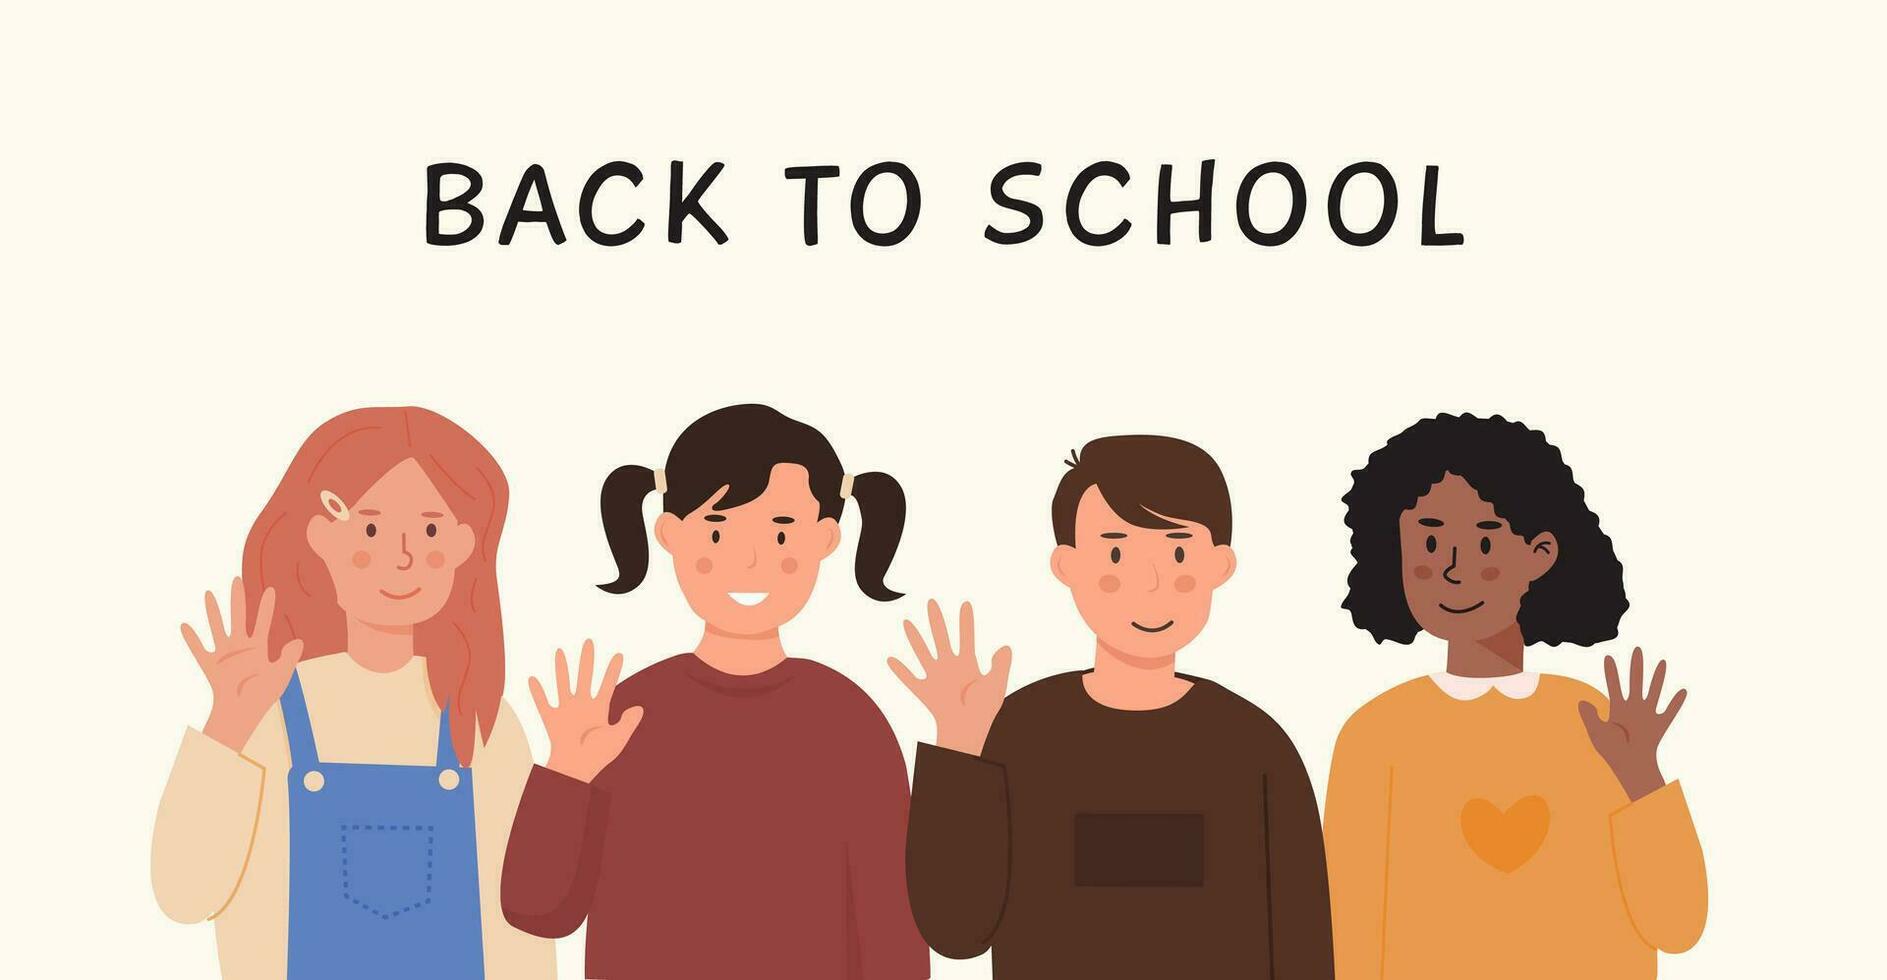 Schoolchildren waving hands and saying hi or bye to school. Diverse kids standing together. Boys and girls smiling and greeting pupils. Colored flat style vector illustration. Horizontal banner